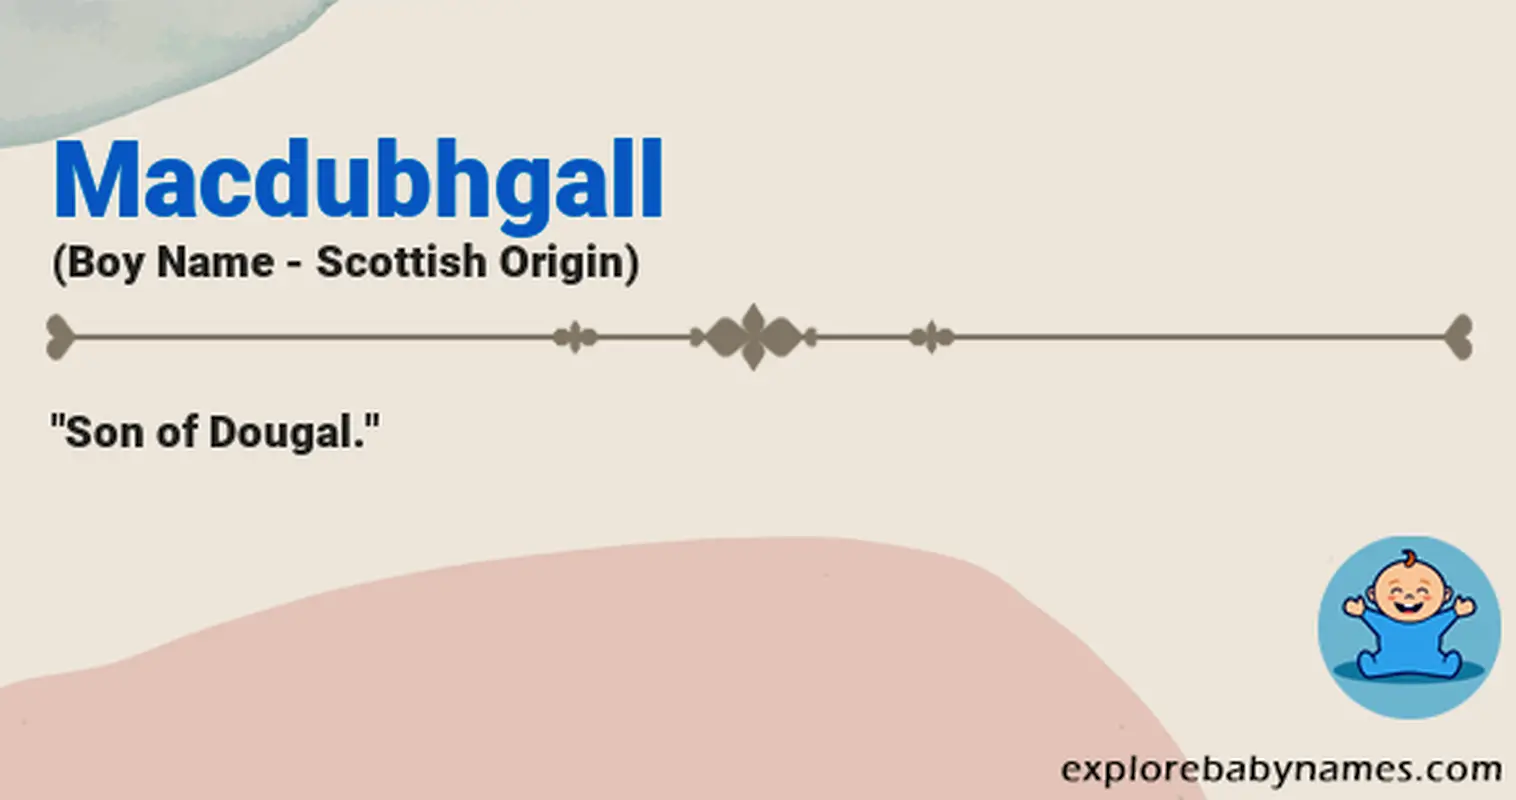 Meaning of Macdubhgall